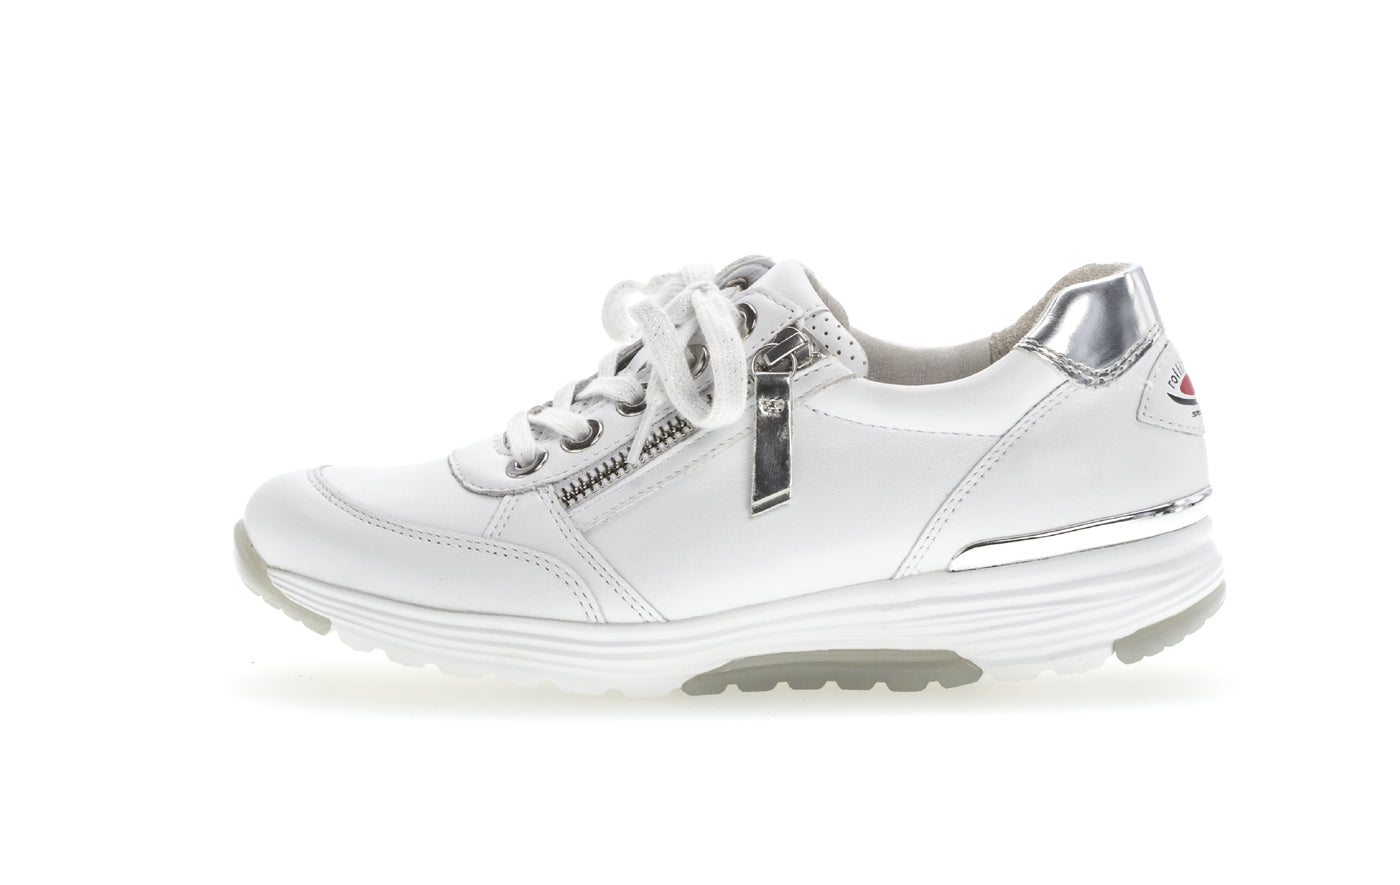 GABOR - 86.973.50 LACED ROLLING SOFT SHOE WITH SIDE ZIP - WHITE/SILVER